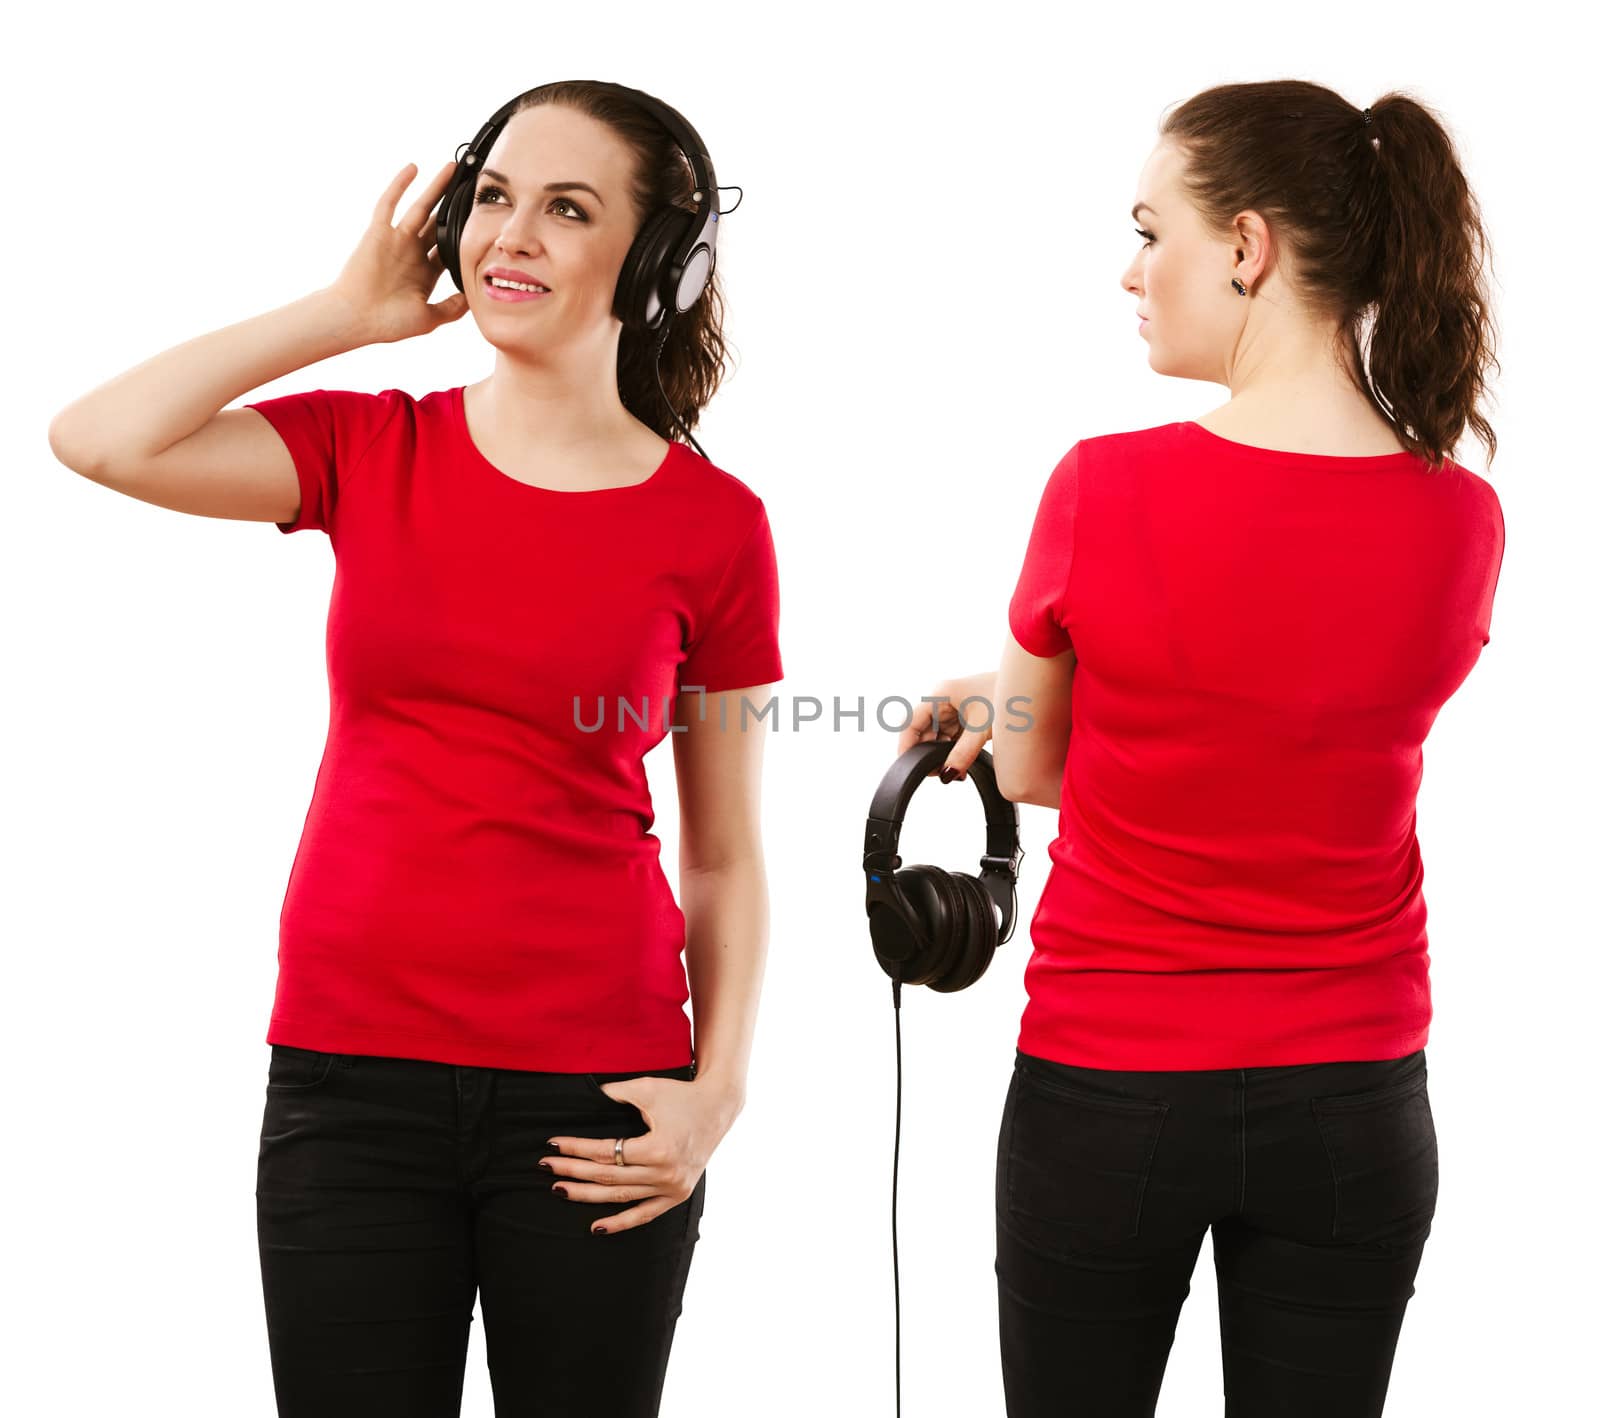 Young beautiful brunette female with blank red shirt listening to music, front and back. Ready for your design or artwork.